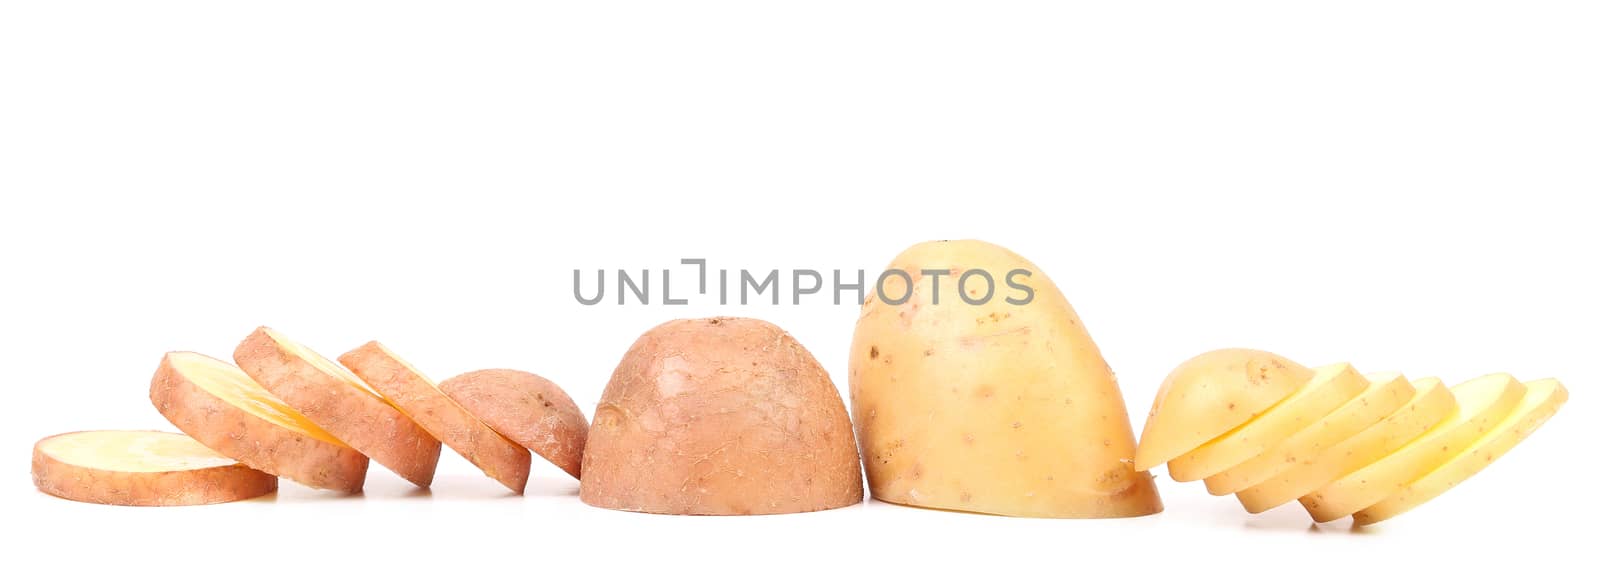 Different potato slices. Isolated on a white background